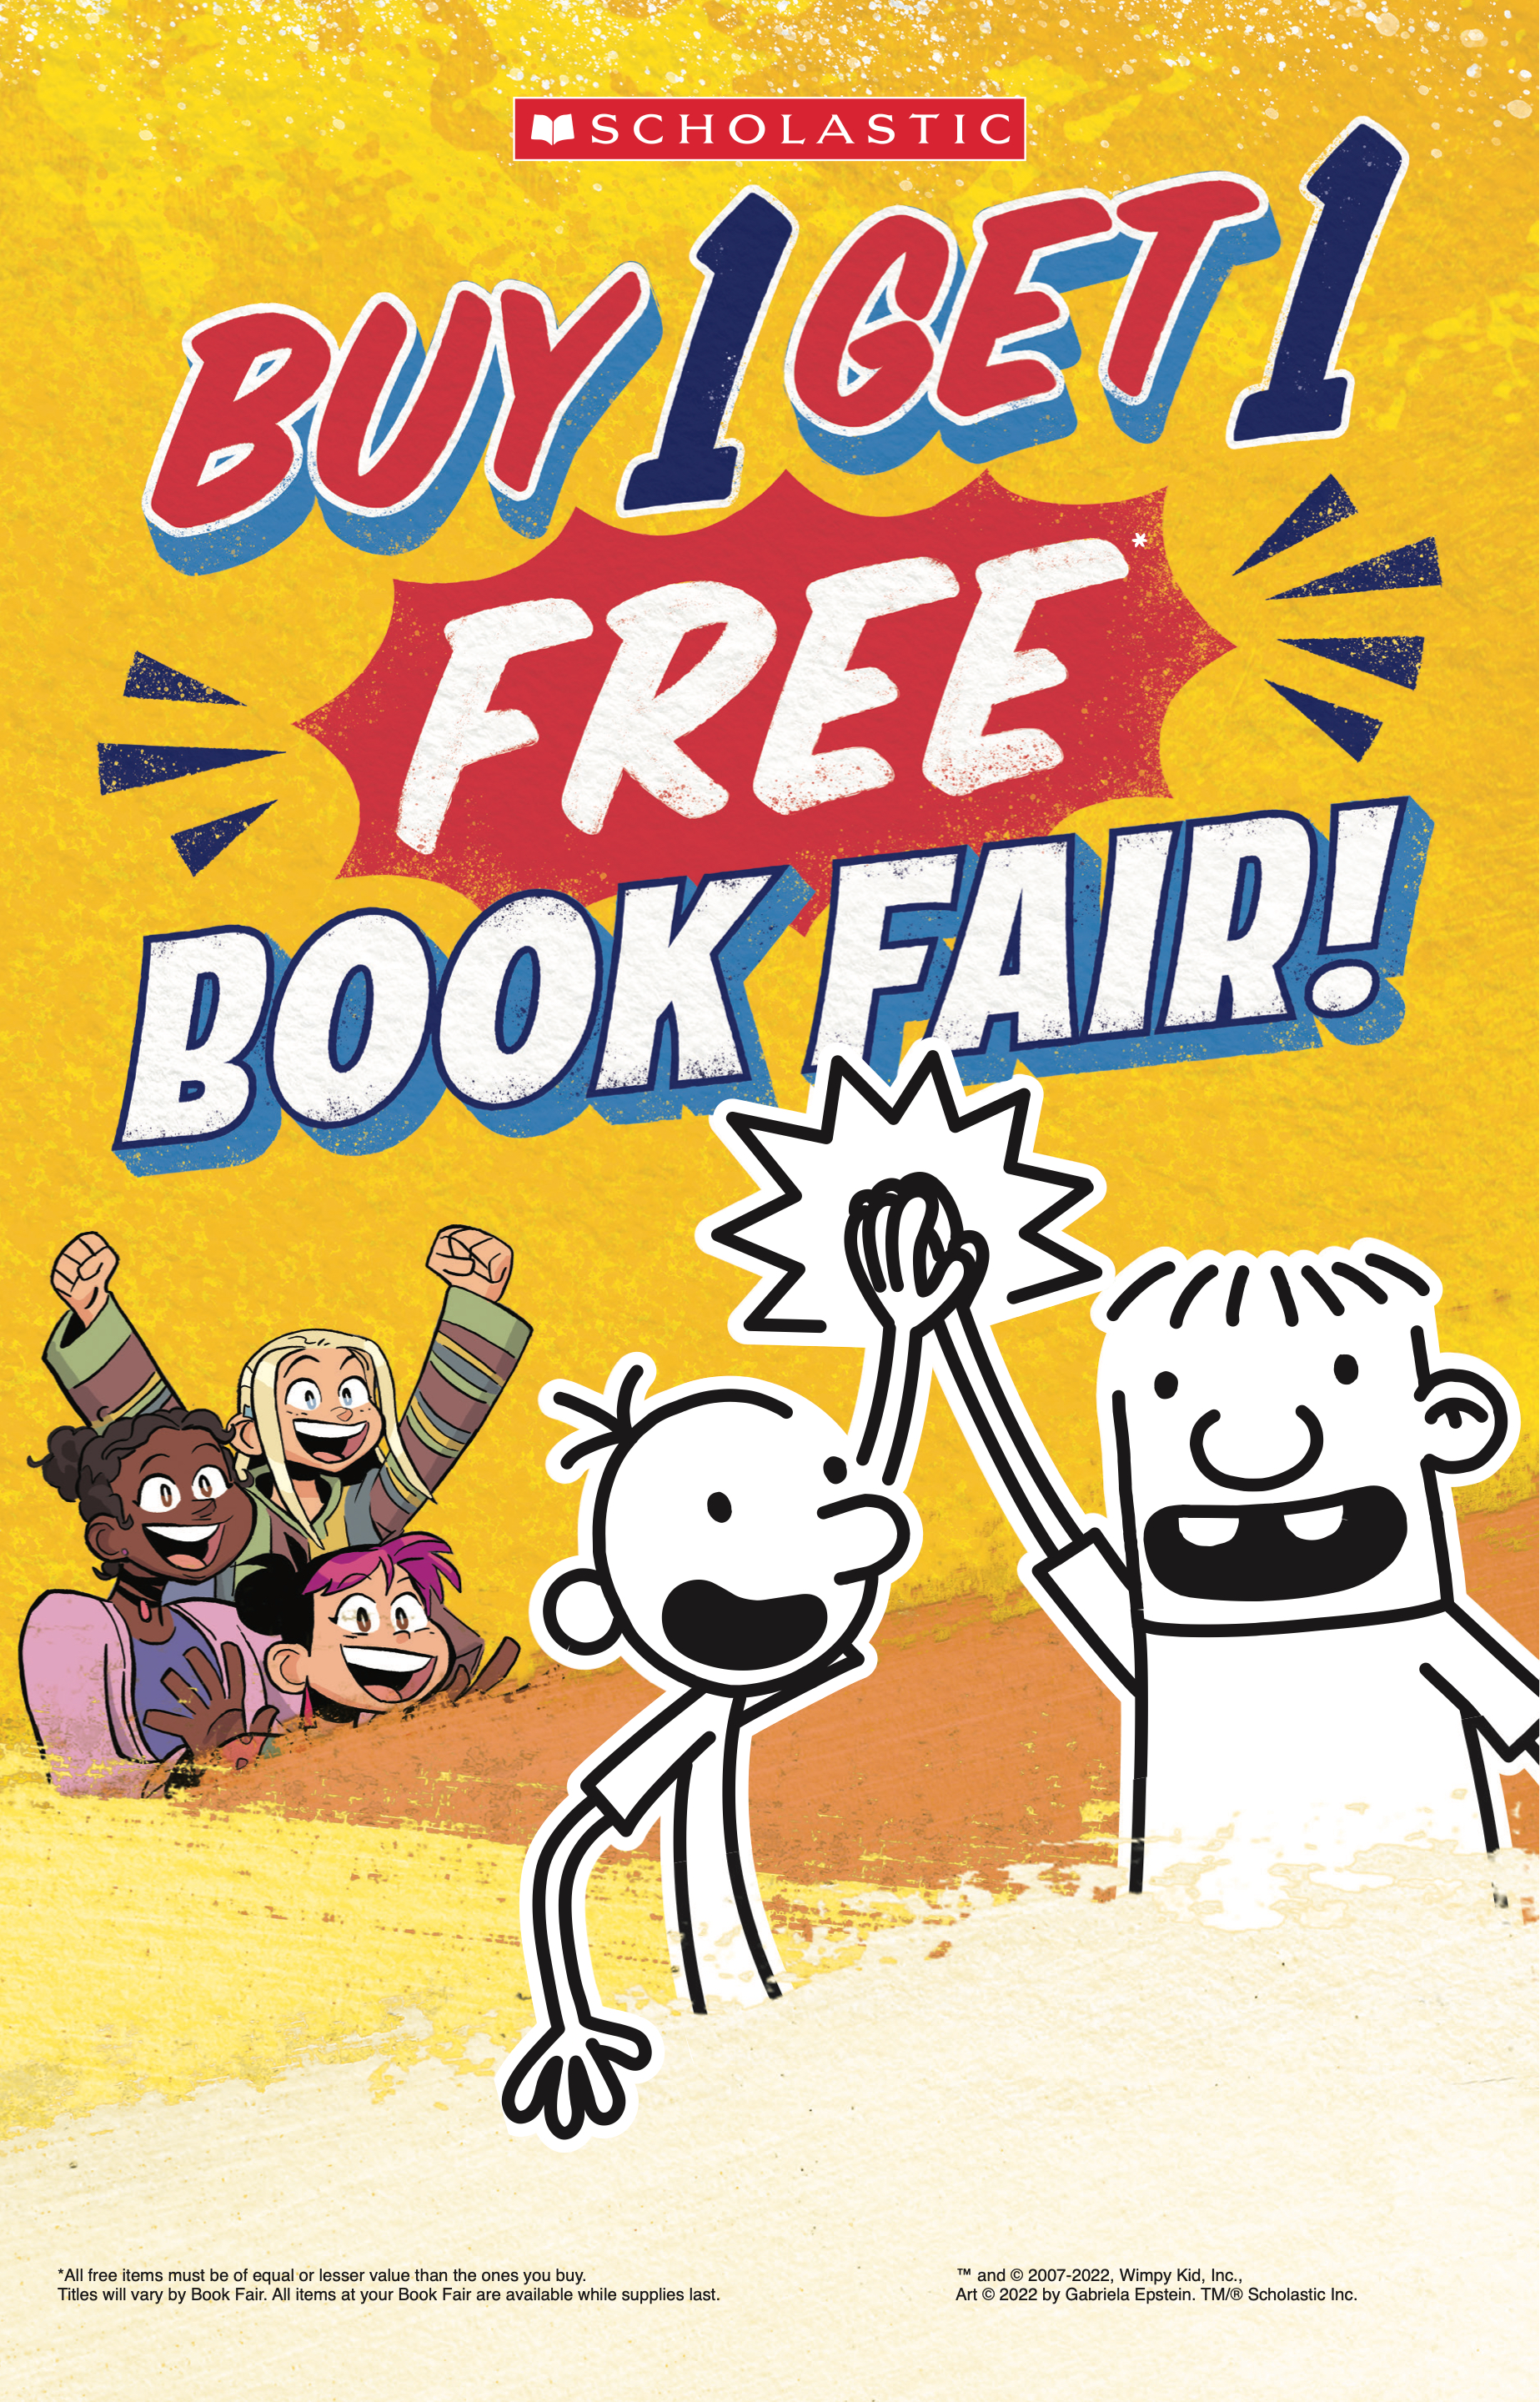 The Scholastic Book Fair is coming to Bowdle School!